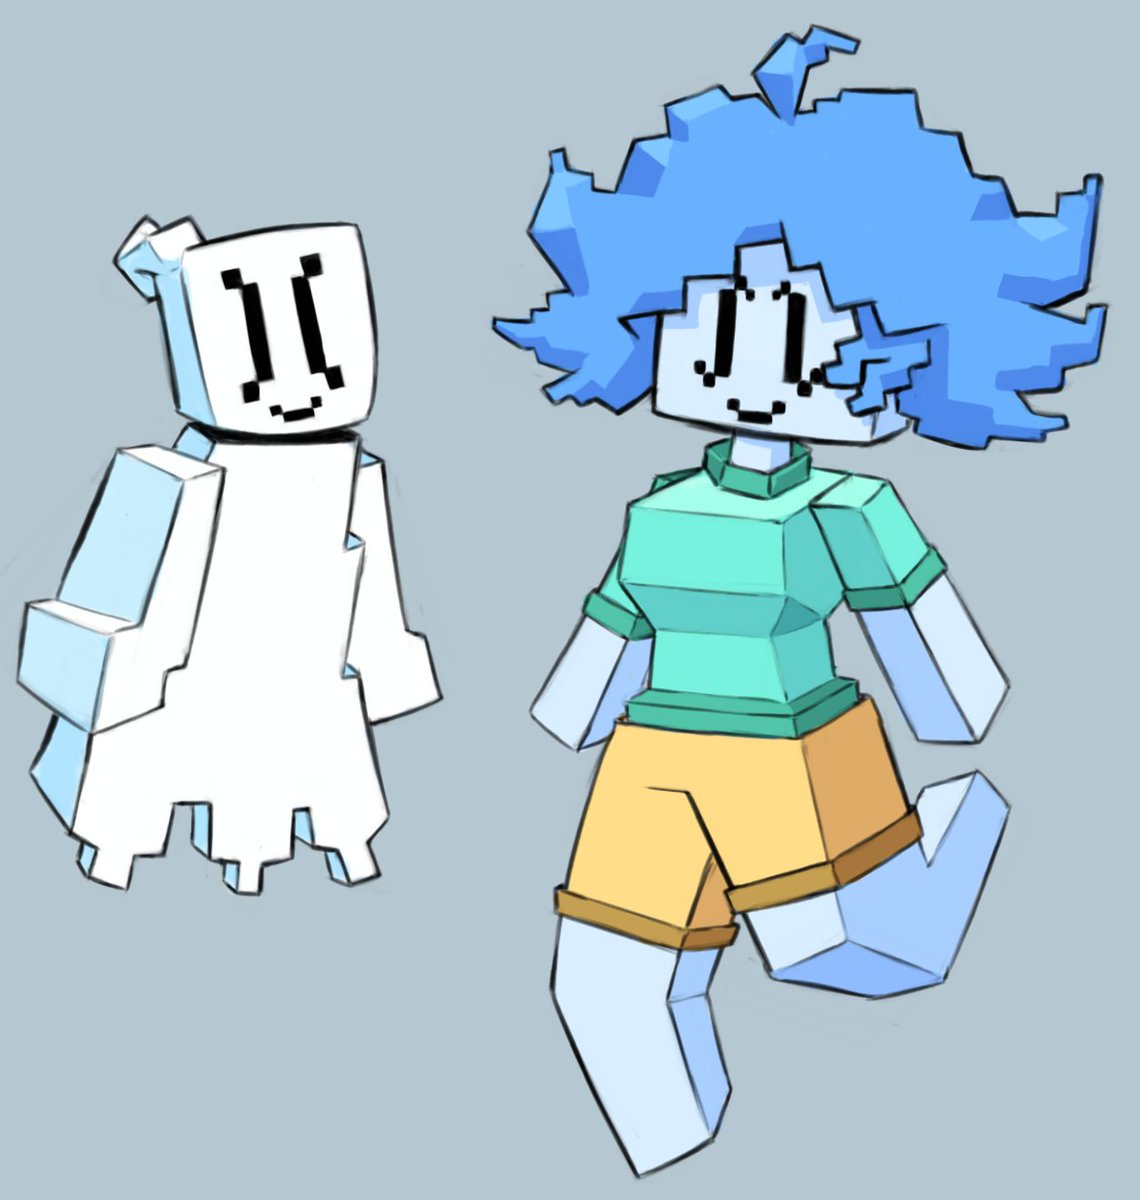 random drawiple/aggie io doodles of boolia and lumee
-Valentine's day drawing
-Minecraft style
-Lume and me (my sona) 